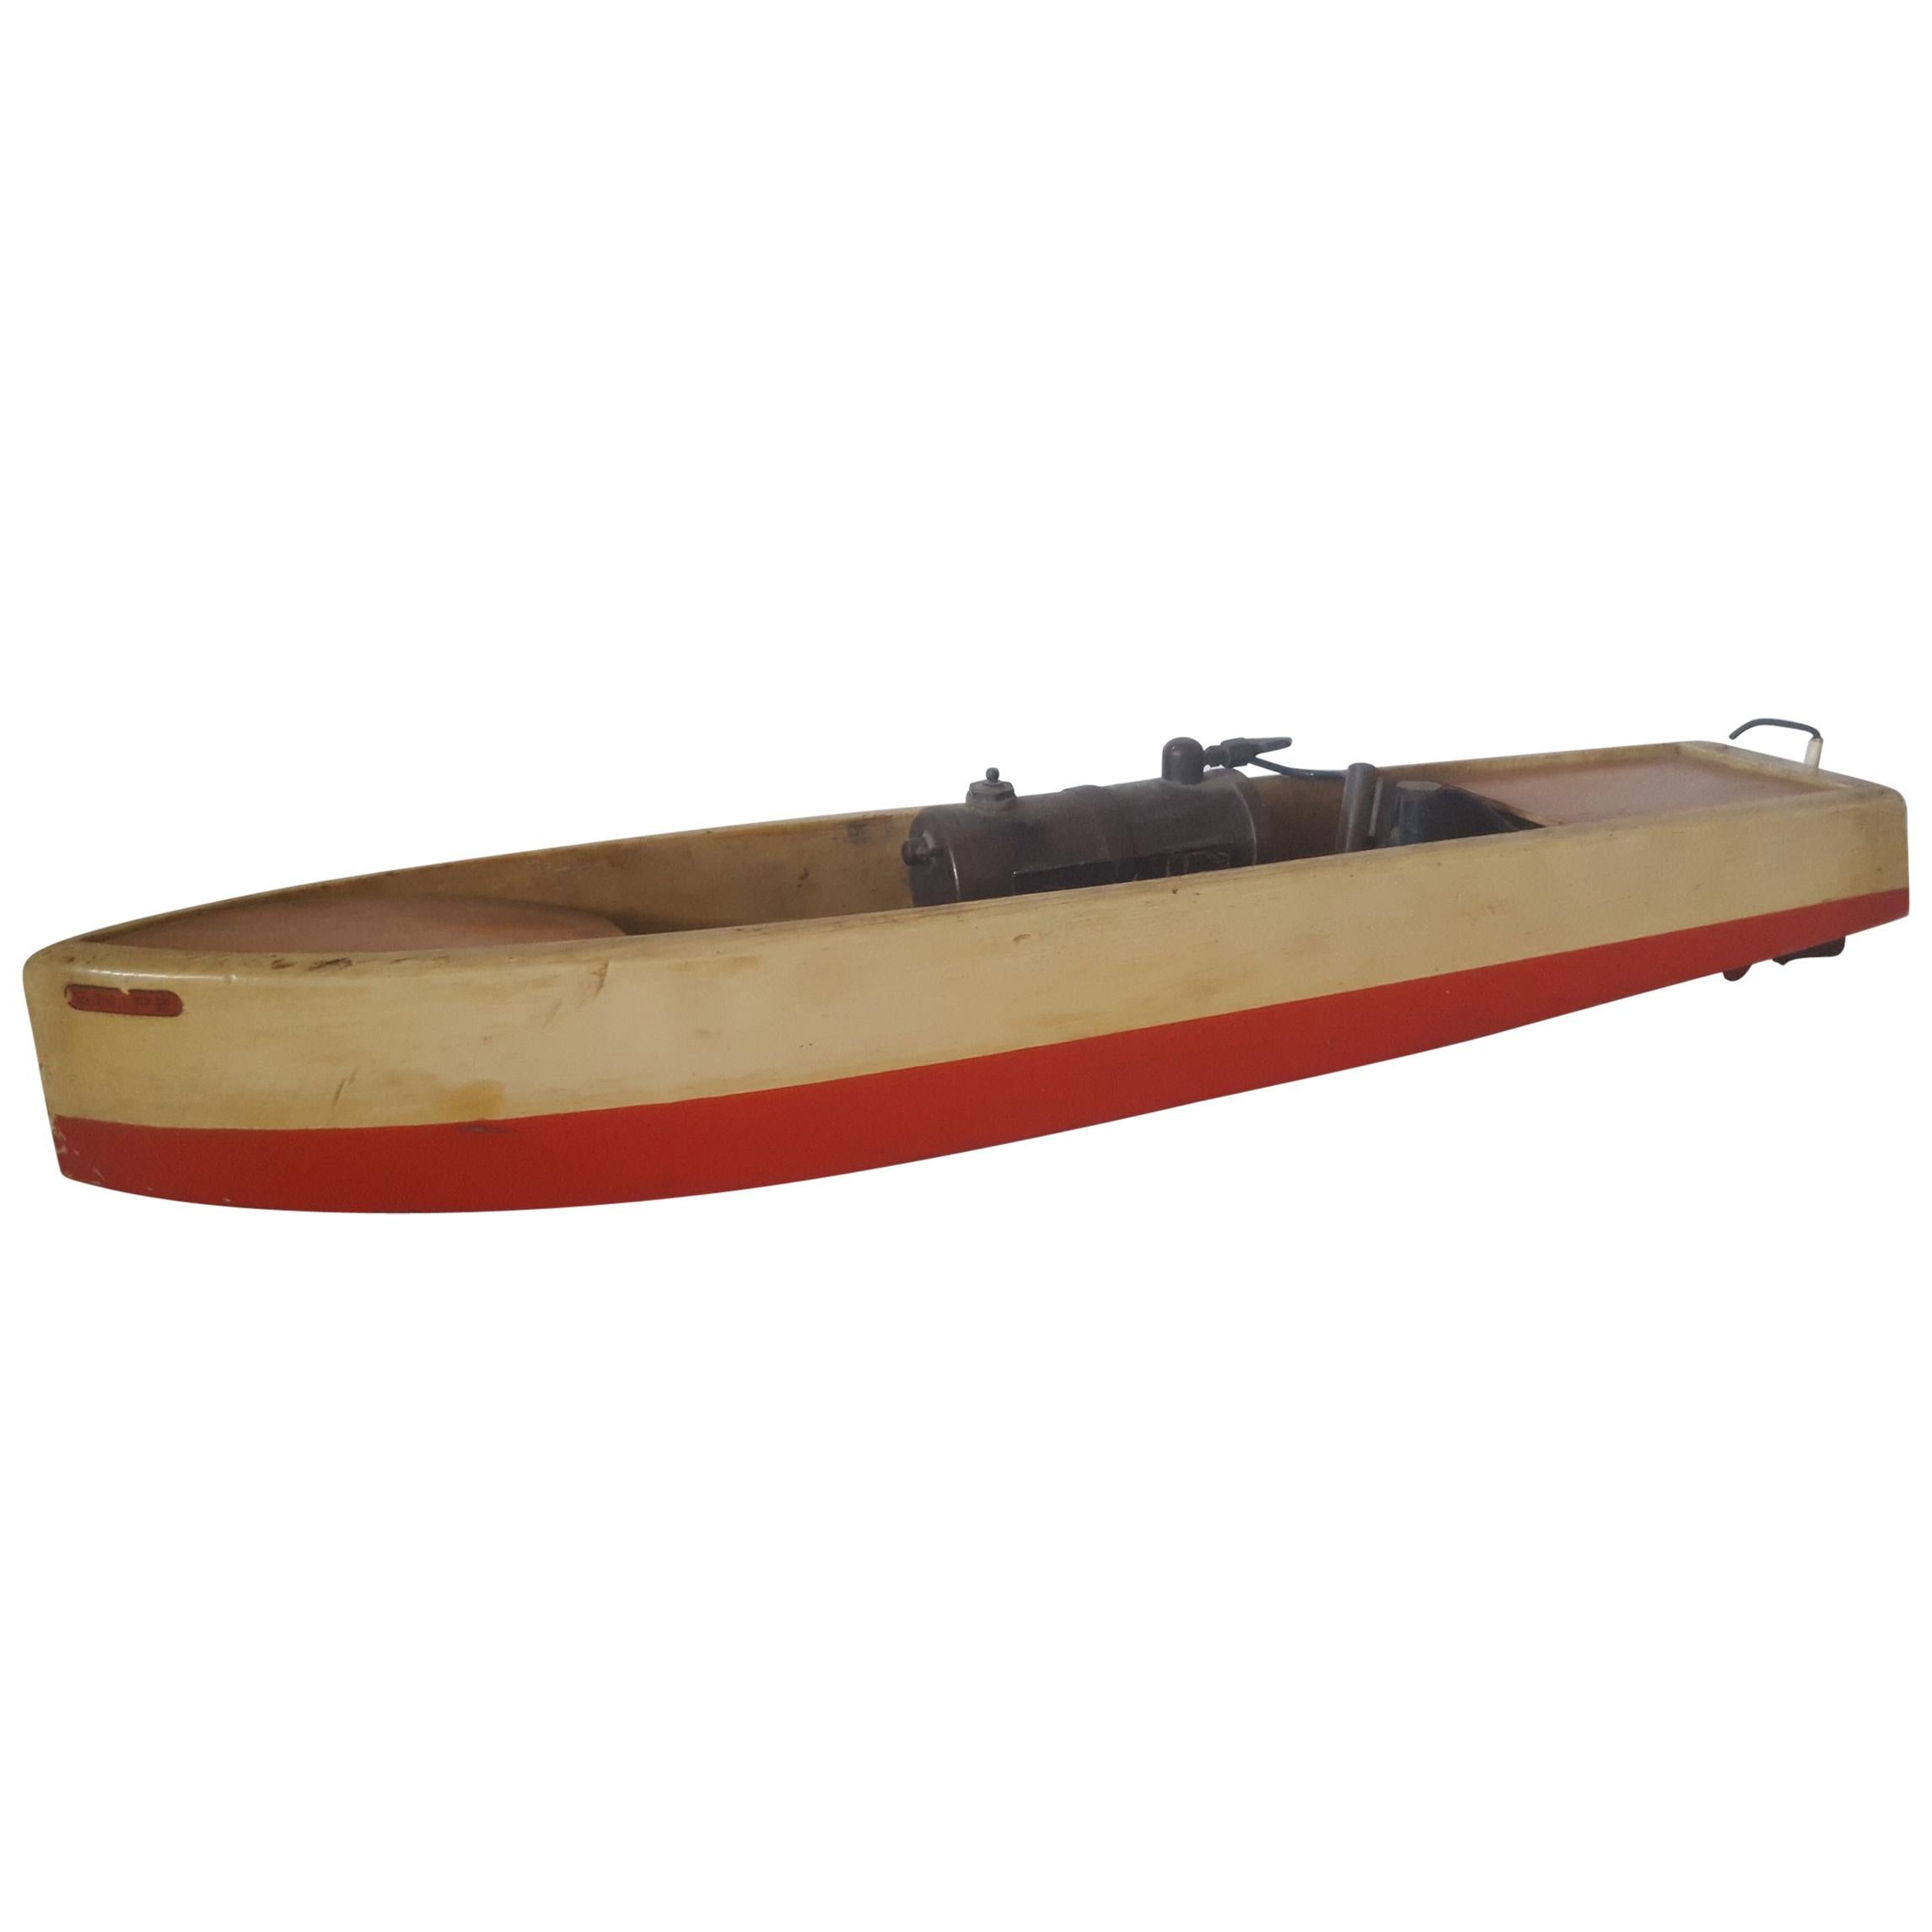 20th Century, Bowman "Snipe" Cruiser, Steam Powered Model Boat, Made in England